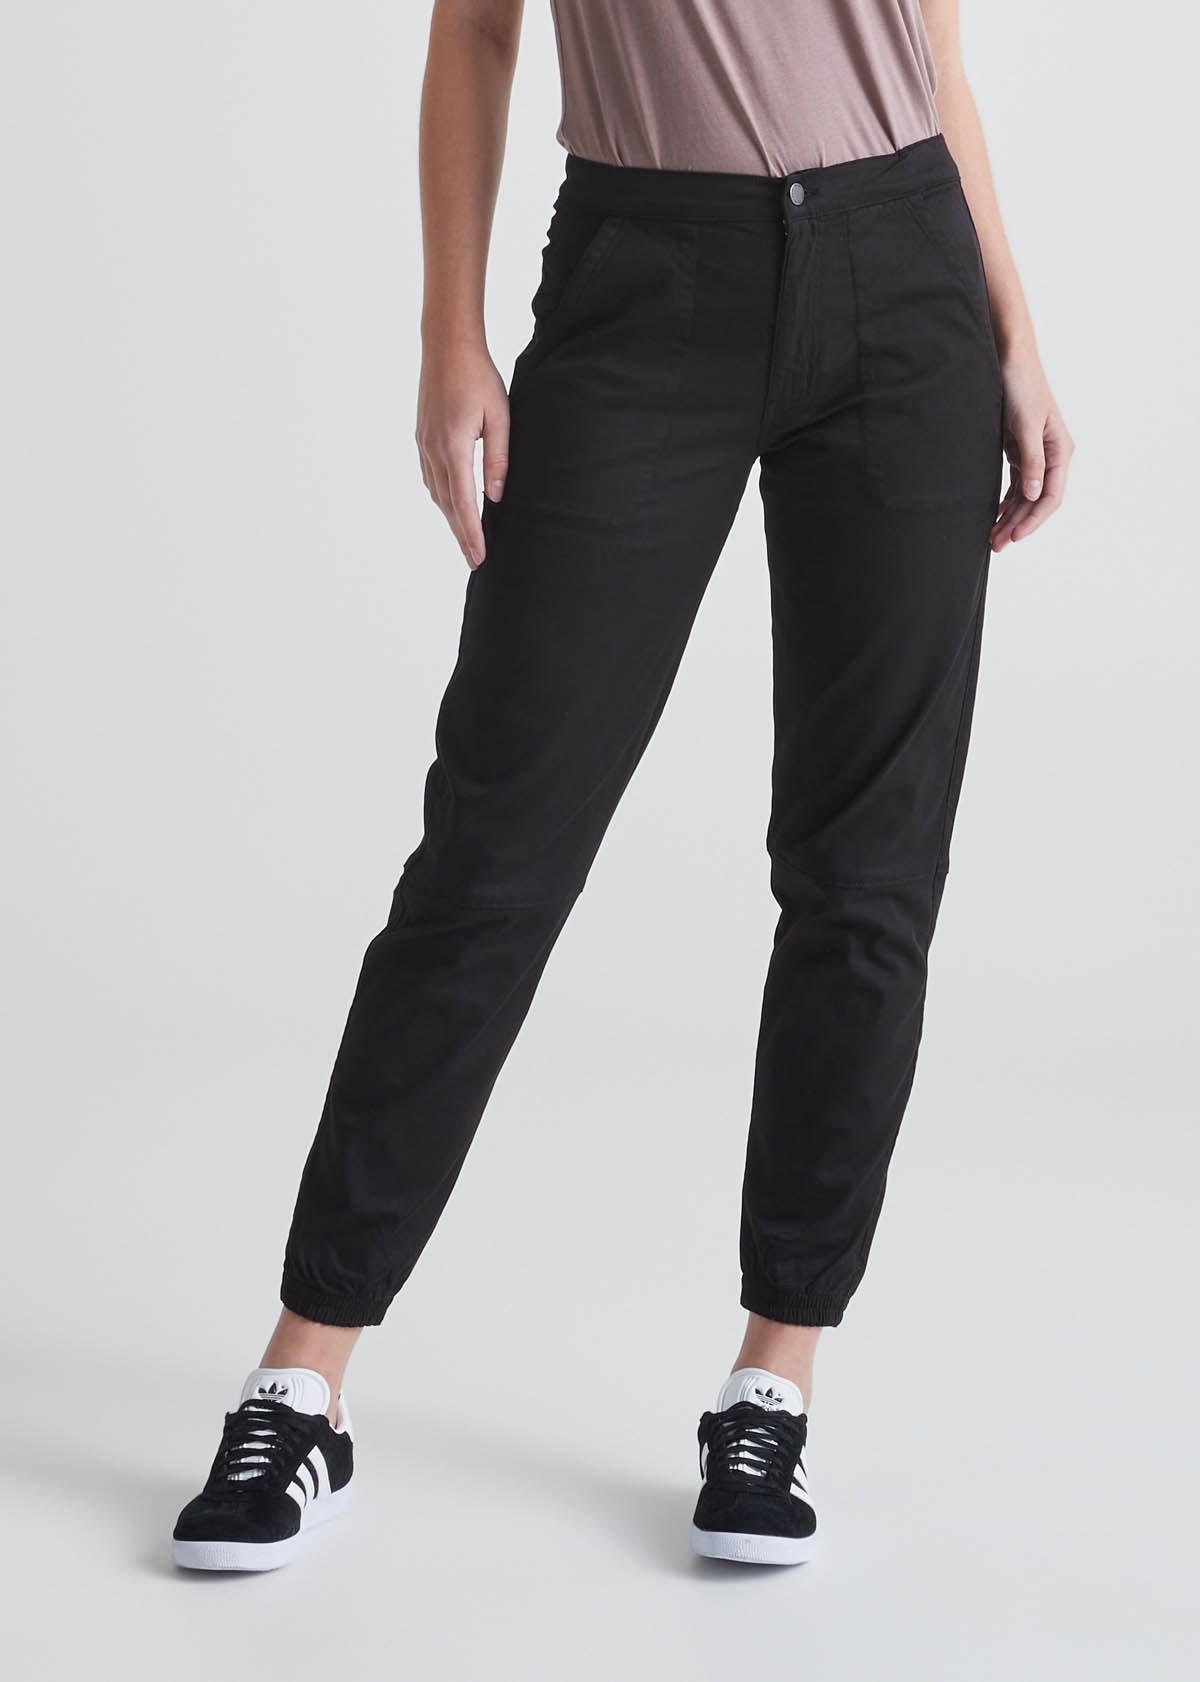 Buy Women's Super Combed Cotton Elastane Stretch Slim Fit Joggers